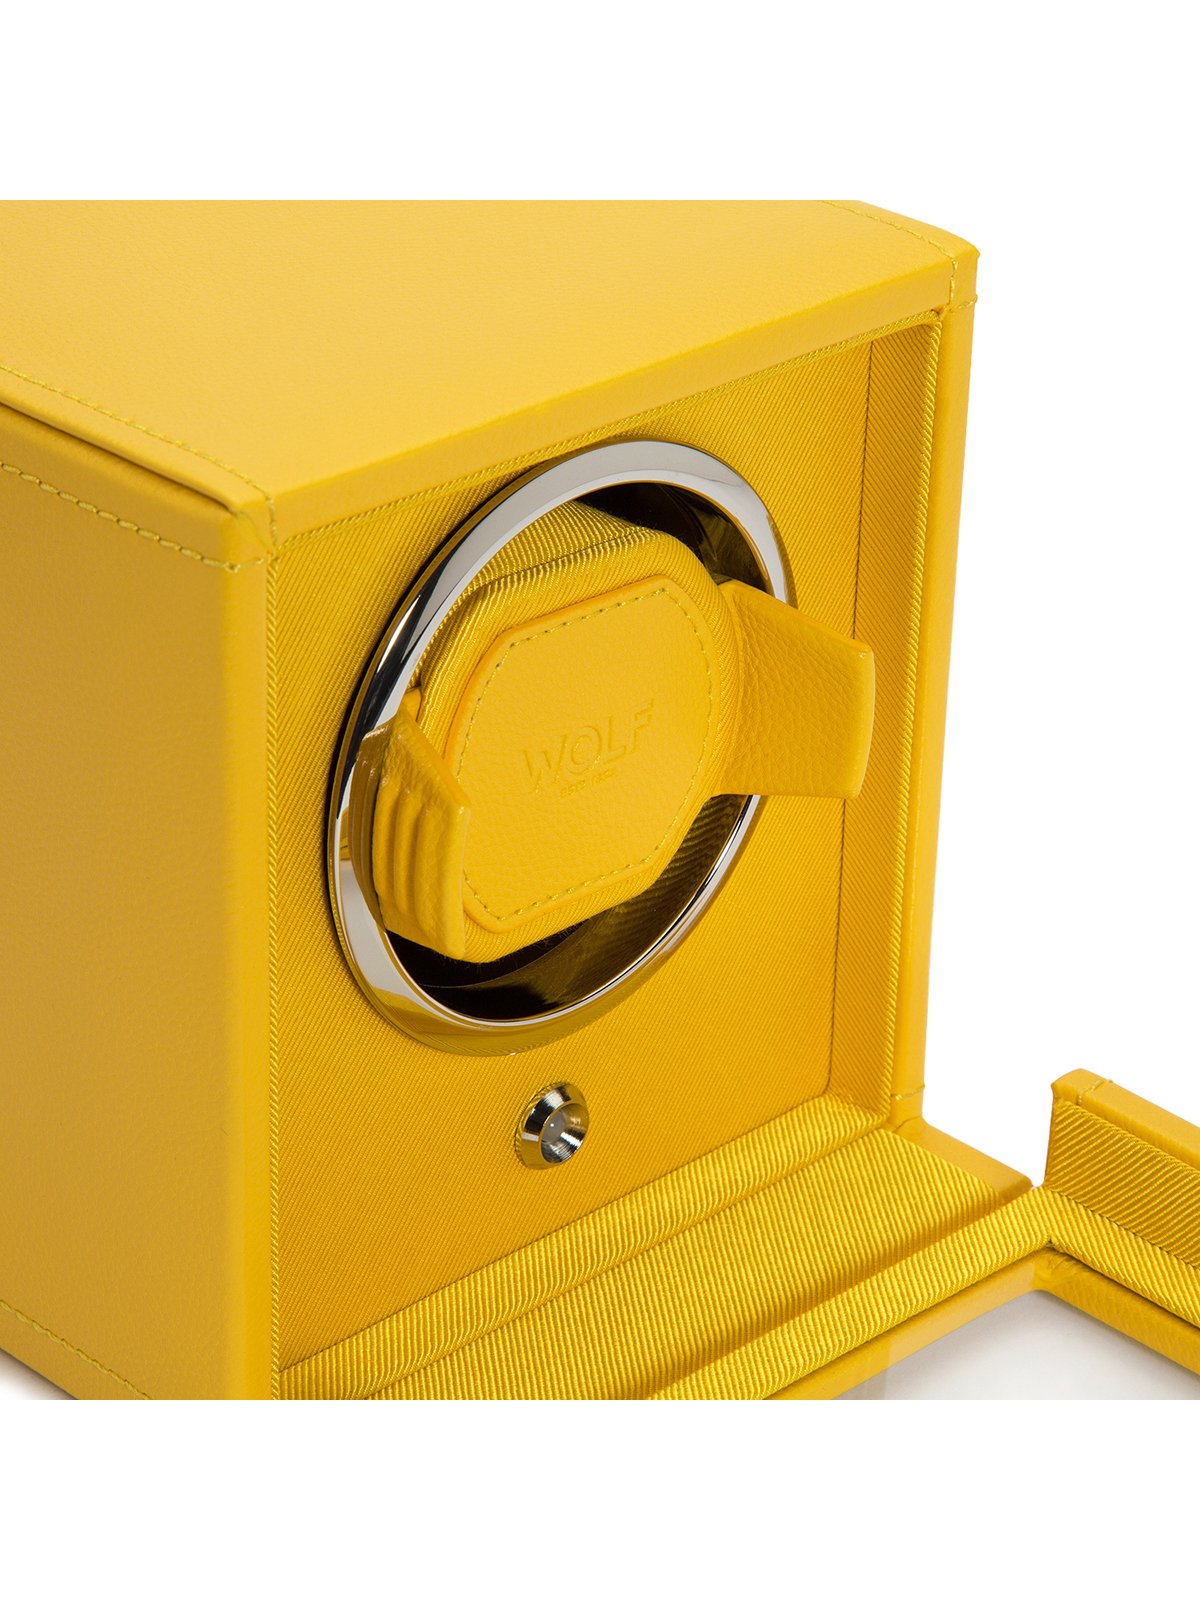 Wolf Cub Single Watch Winder with Cover in Yellow 461192